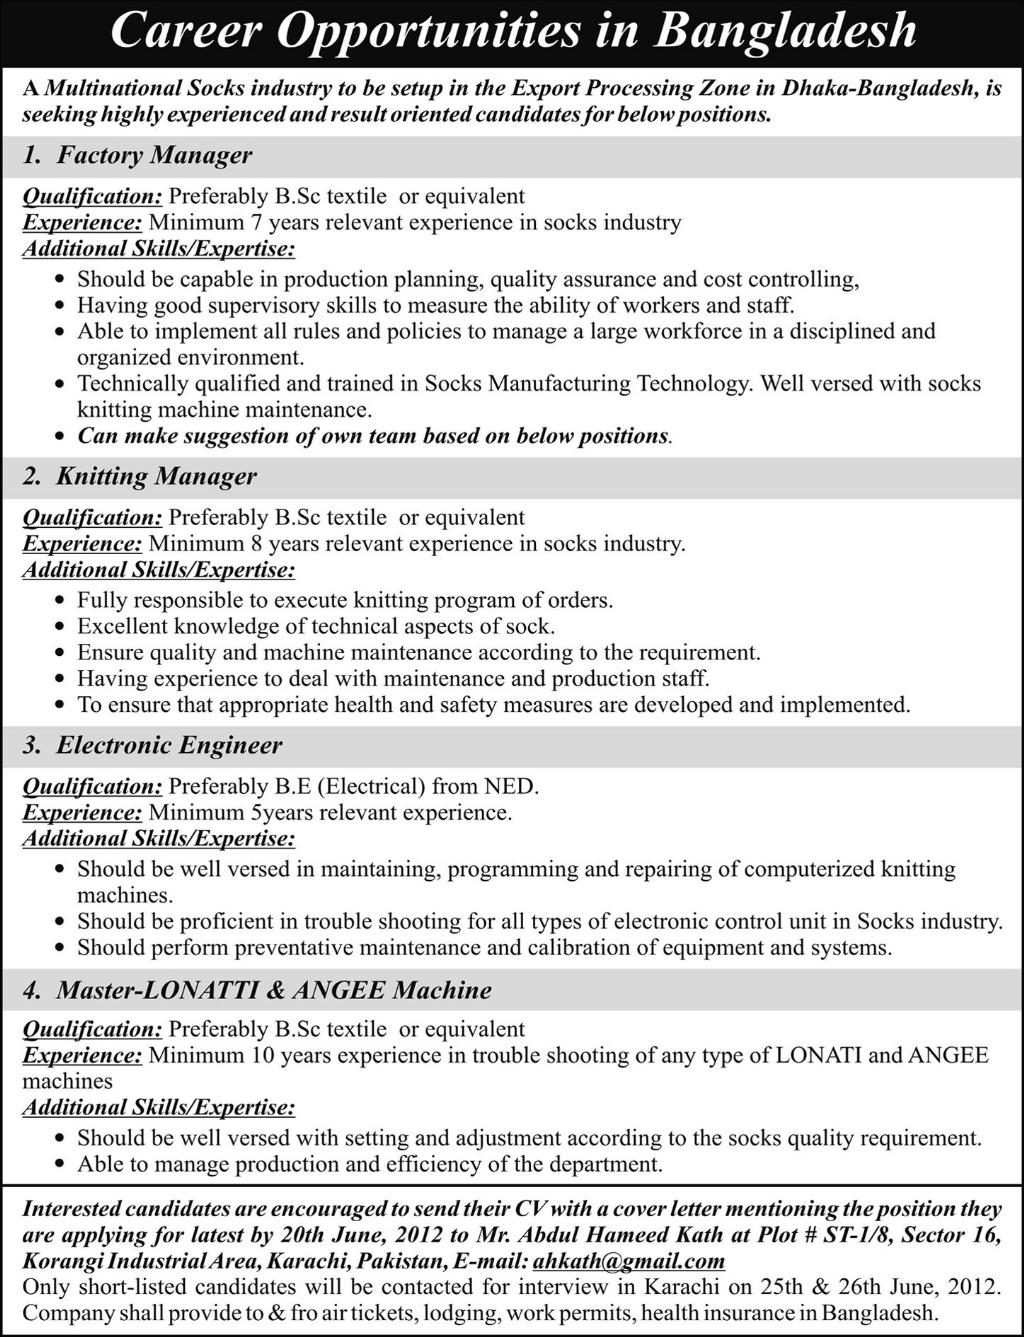 Management and Engineering Jobs at a Multinational Socks Industry